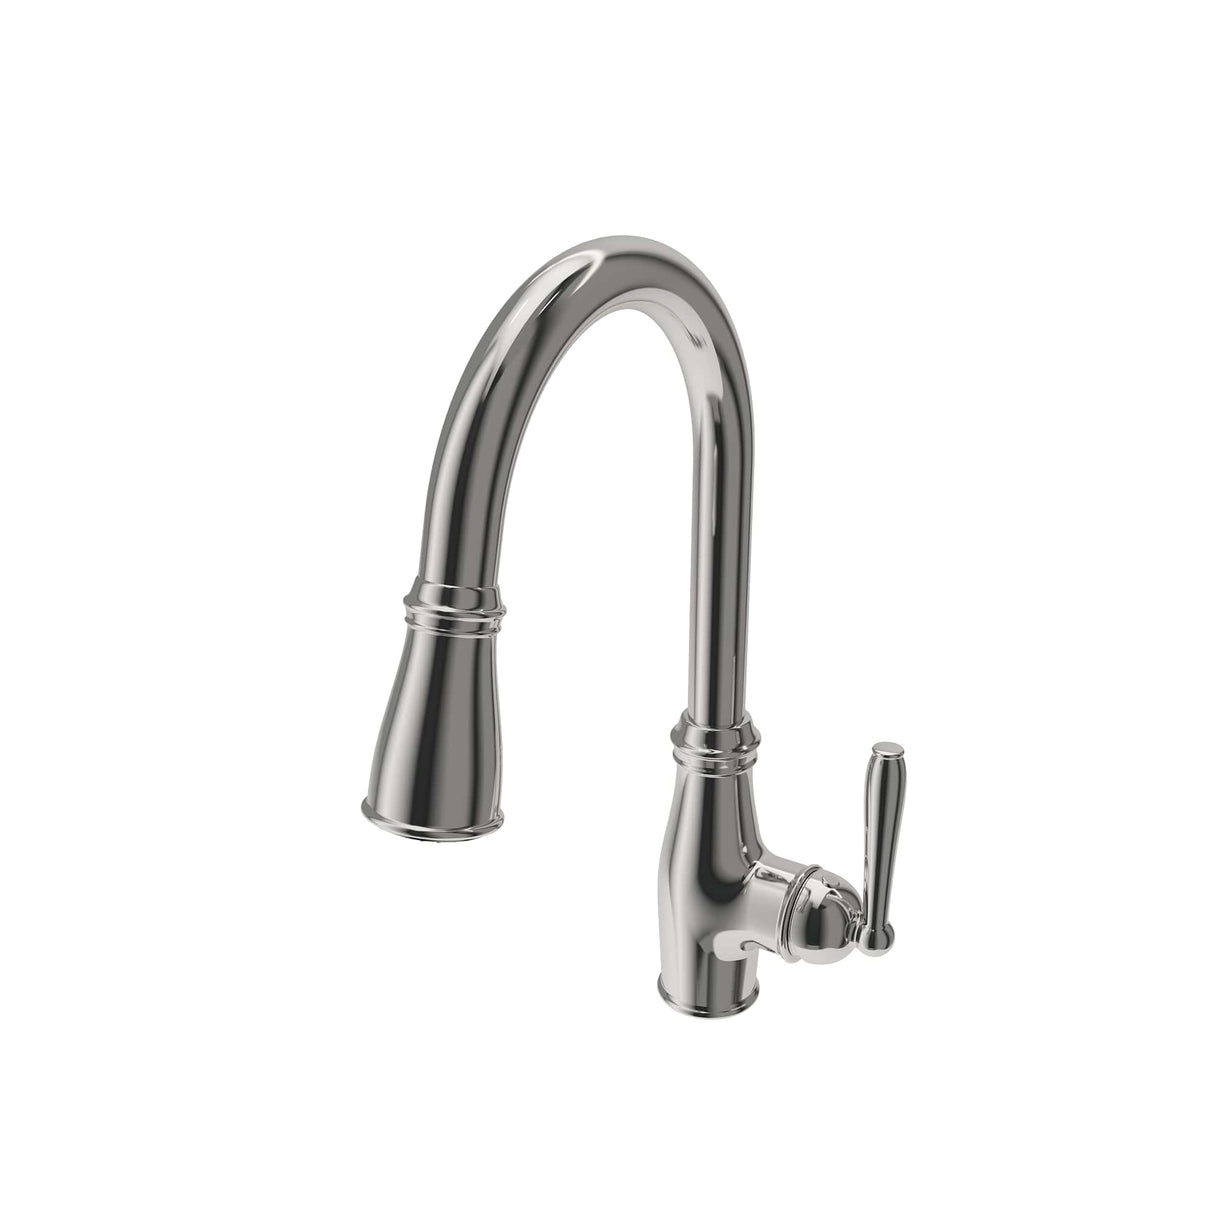 BOCCHI 2023 0001 SS Belsena 2.0 Pull-Down Kitchen Faucet in Stainless Steel